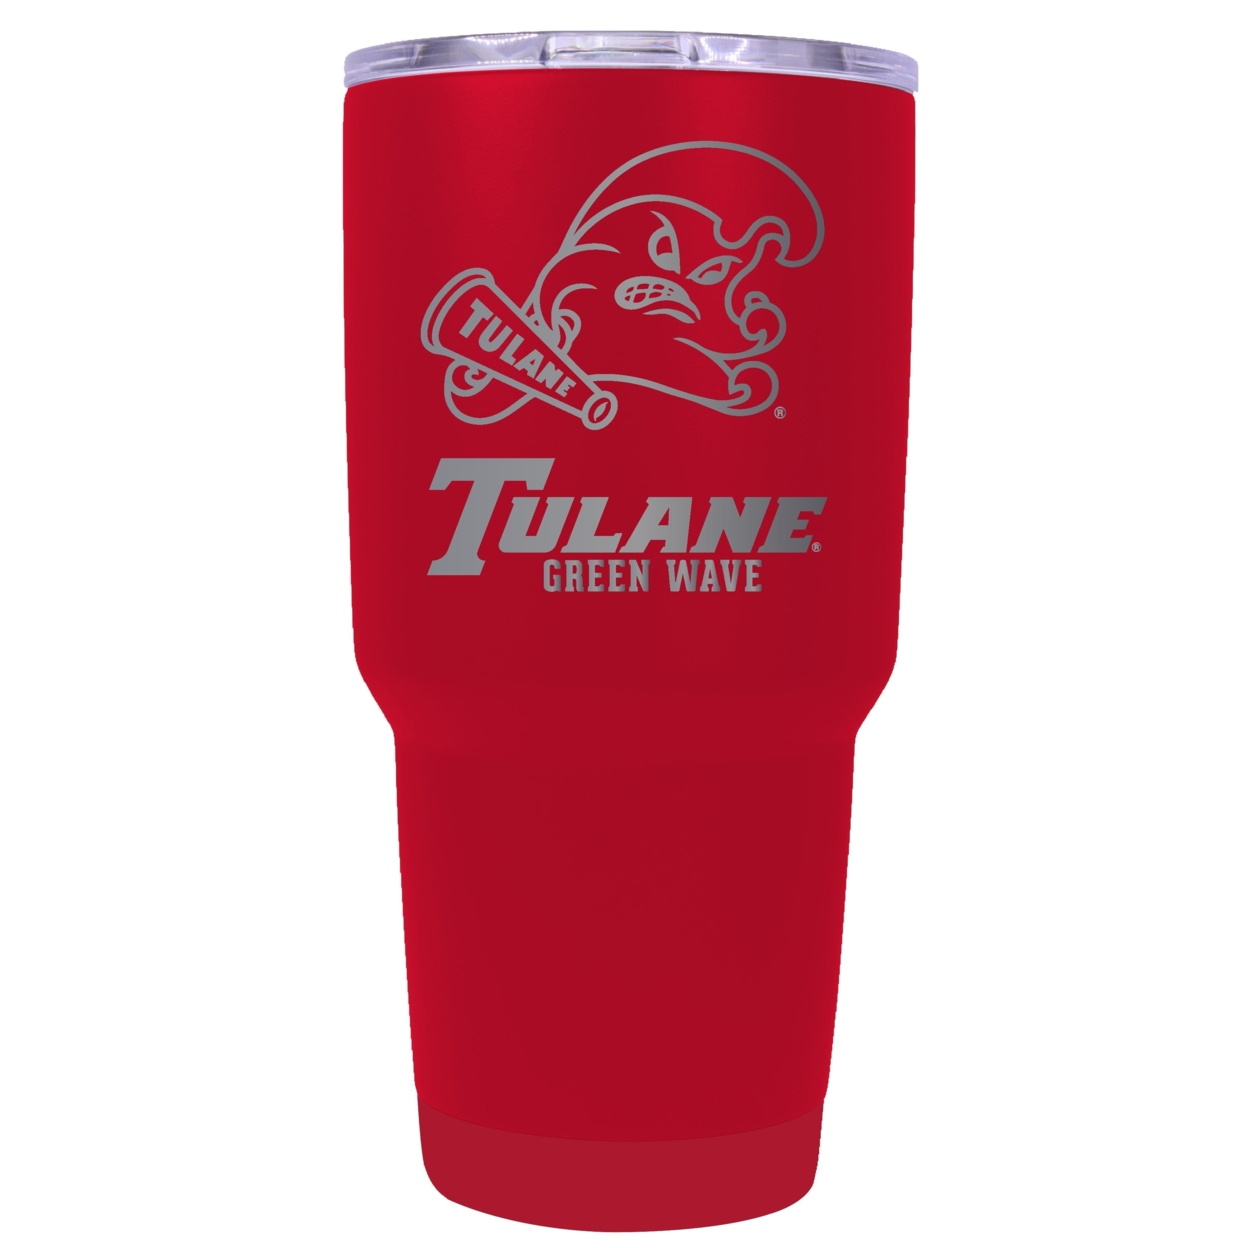 Tulane University Green Wave 24 Oz Laser Engraved Stainless Steel Insulated Tumbler - Choose Your Color. - Red